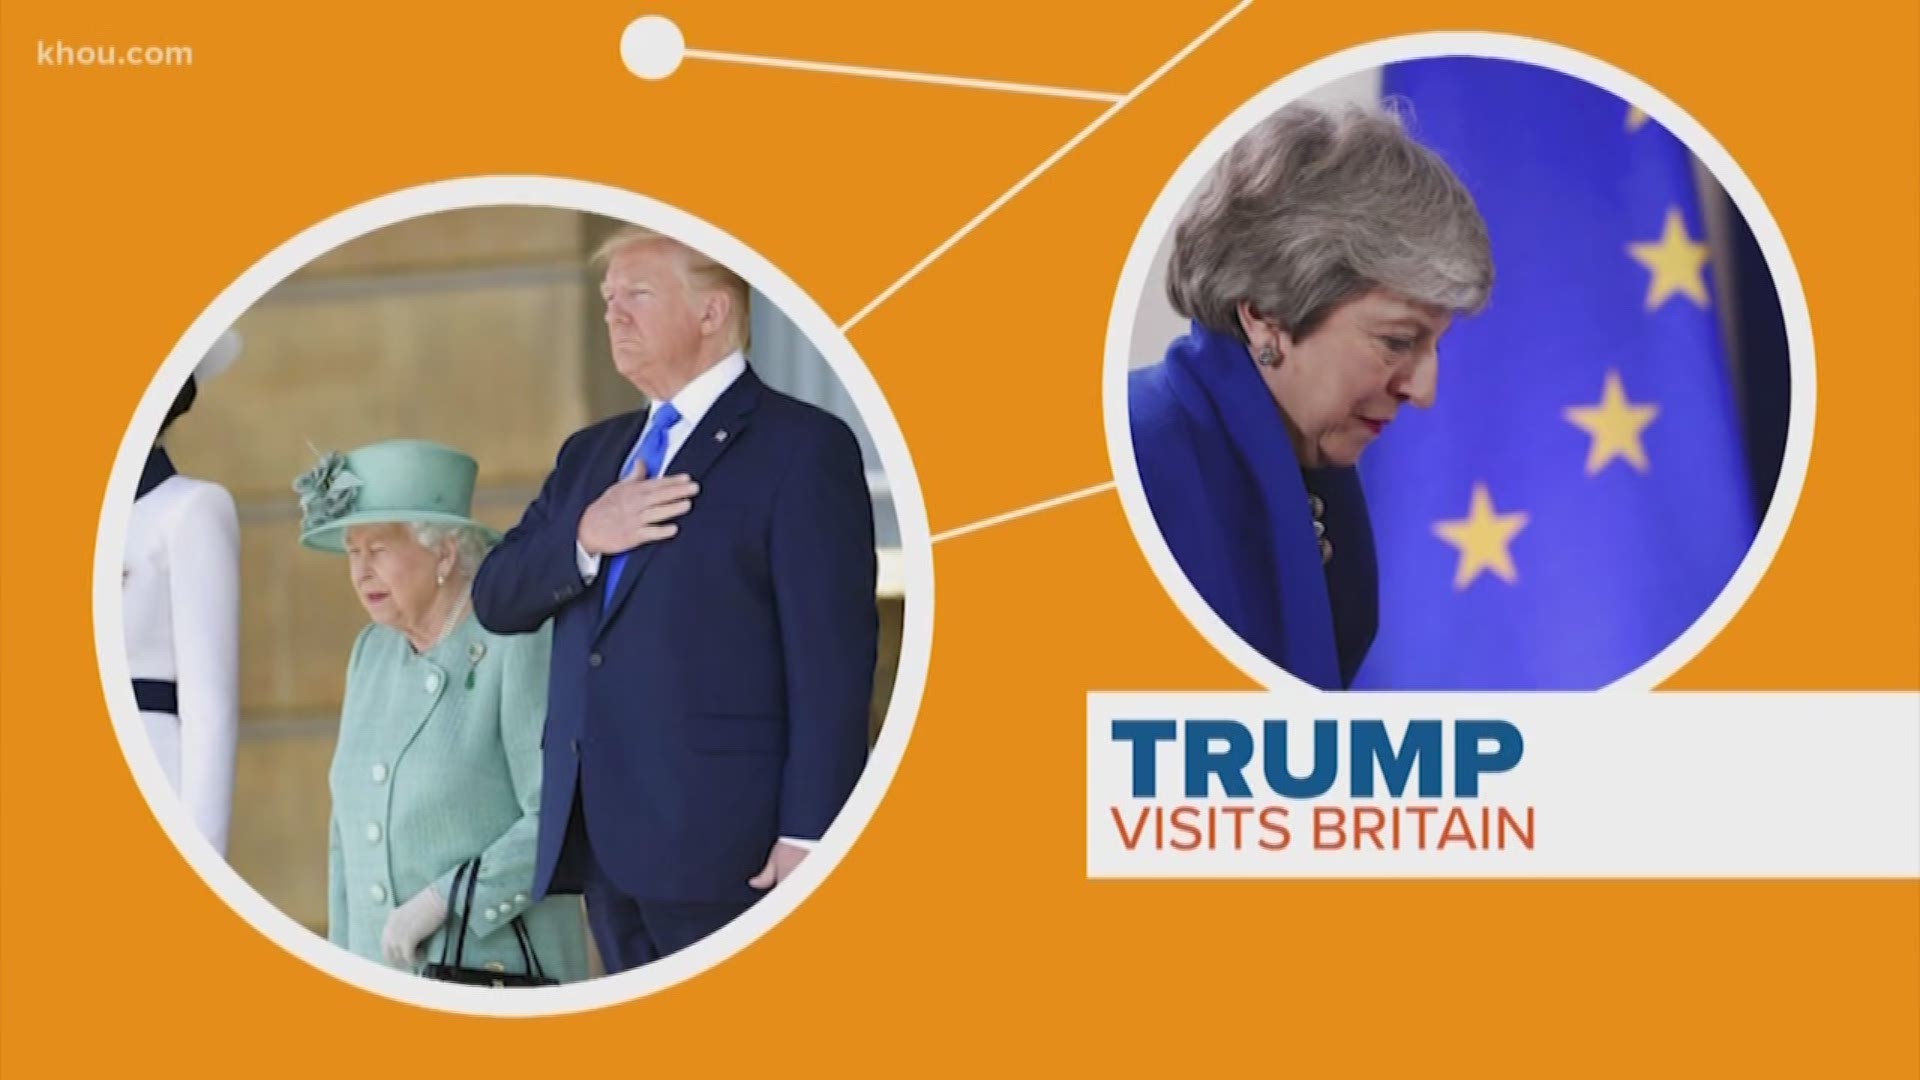 The focus shifts to policy today as President Trump meets with British Prime Minister Theresa May this morning. Two things that will likely come up – Brexit, and May's departure this week. Stephanie Whitfield connects the dots.